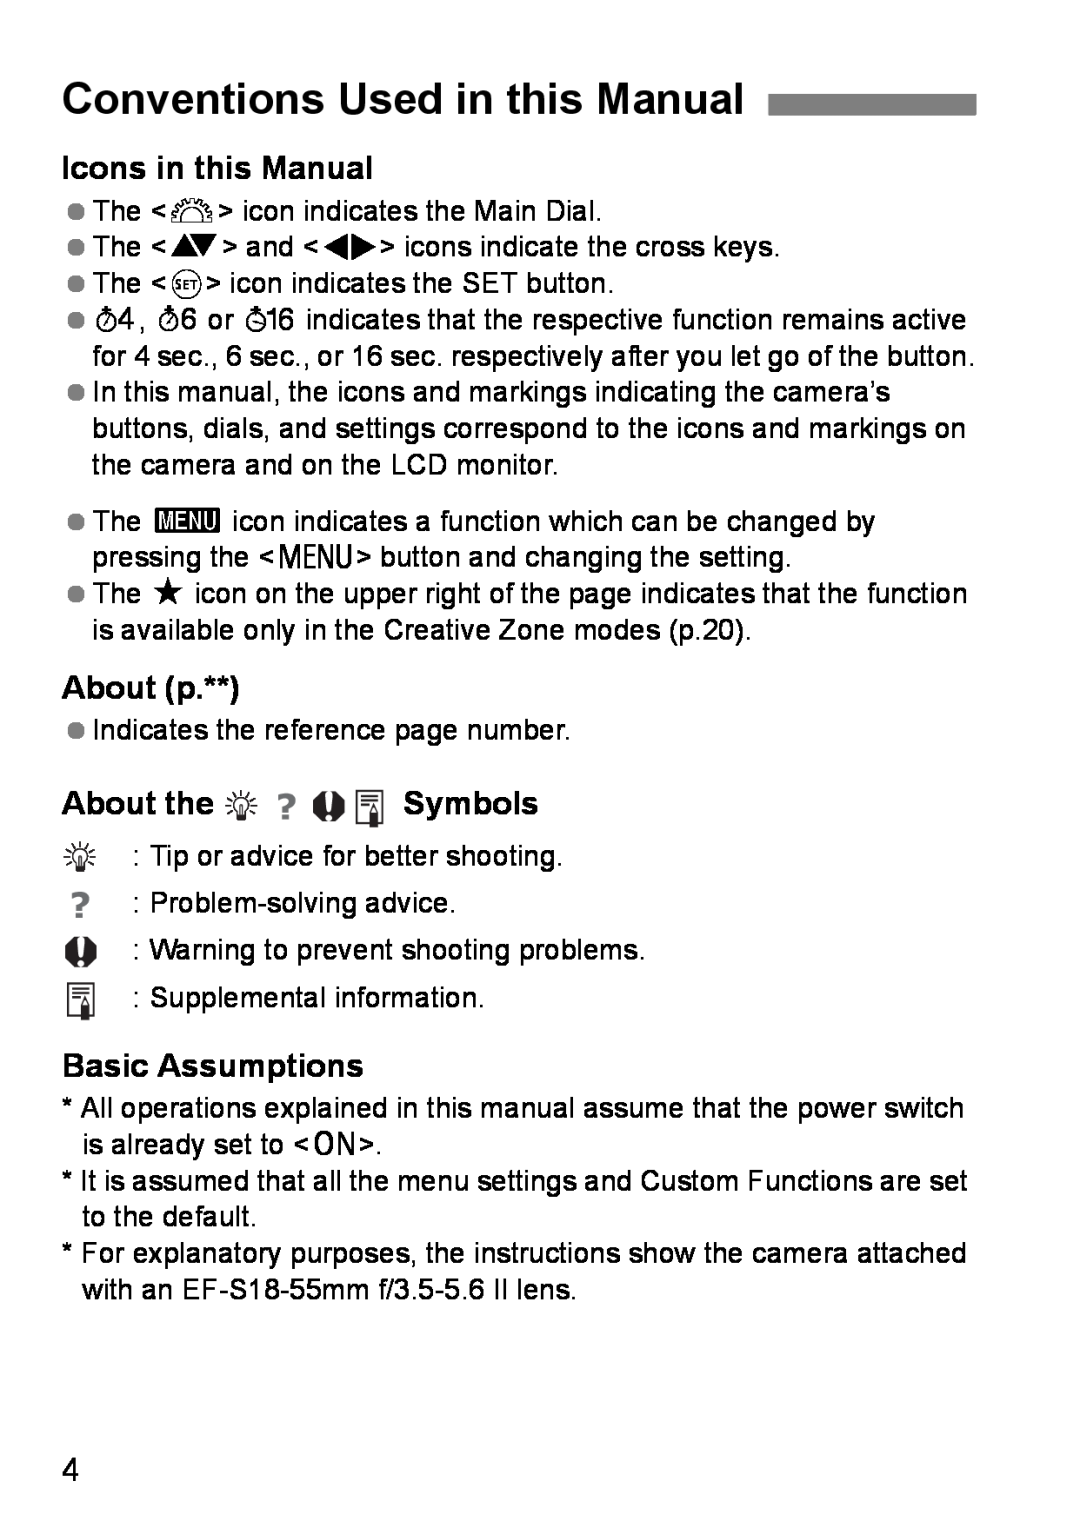 Canon EOS DIGITAL REBEL XTI Conventions Used in this Manual, Icons in this Manual, About p, About the Symbols 